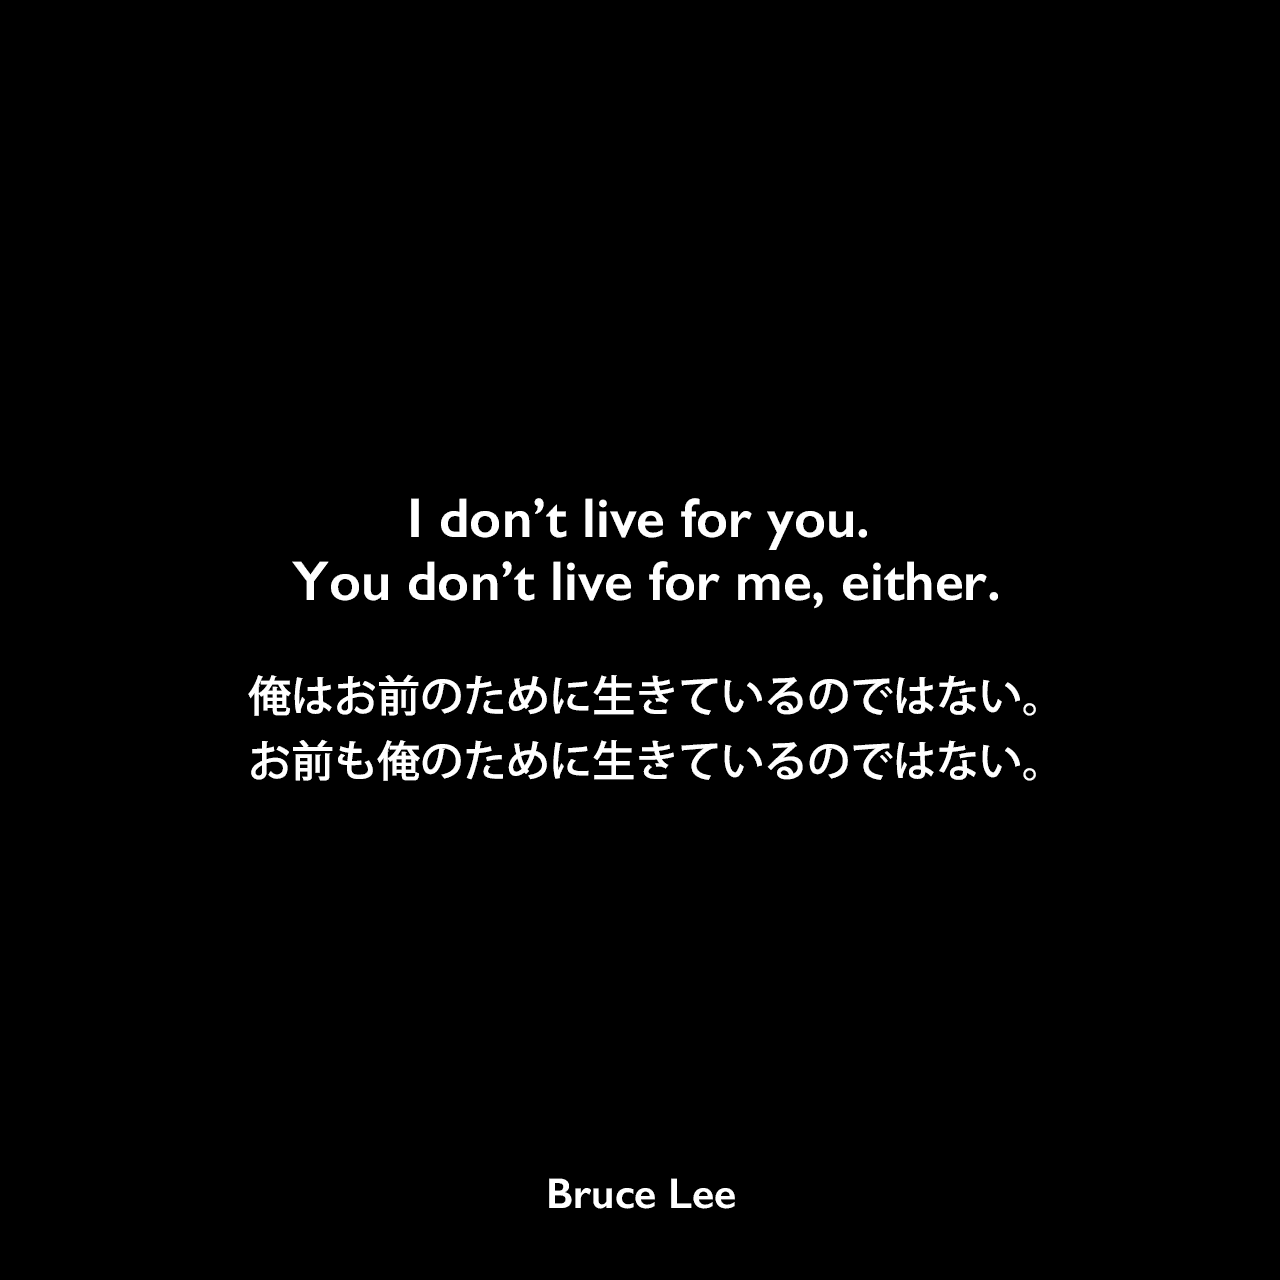 I don’t live for you. You don’t live for me, either.俺はお前のために生きているのではない。お前も俺のために生きているのではない。Bruce Lee